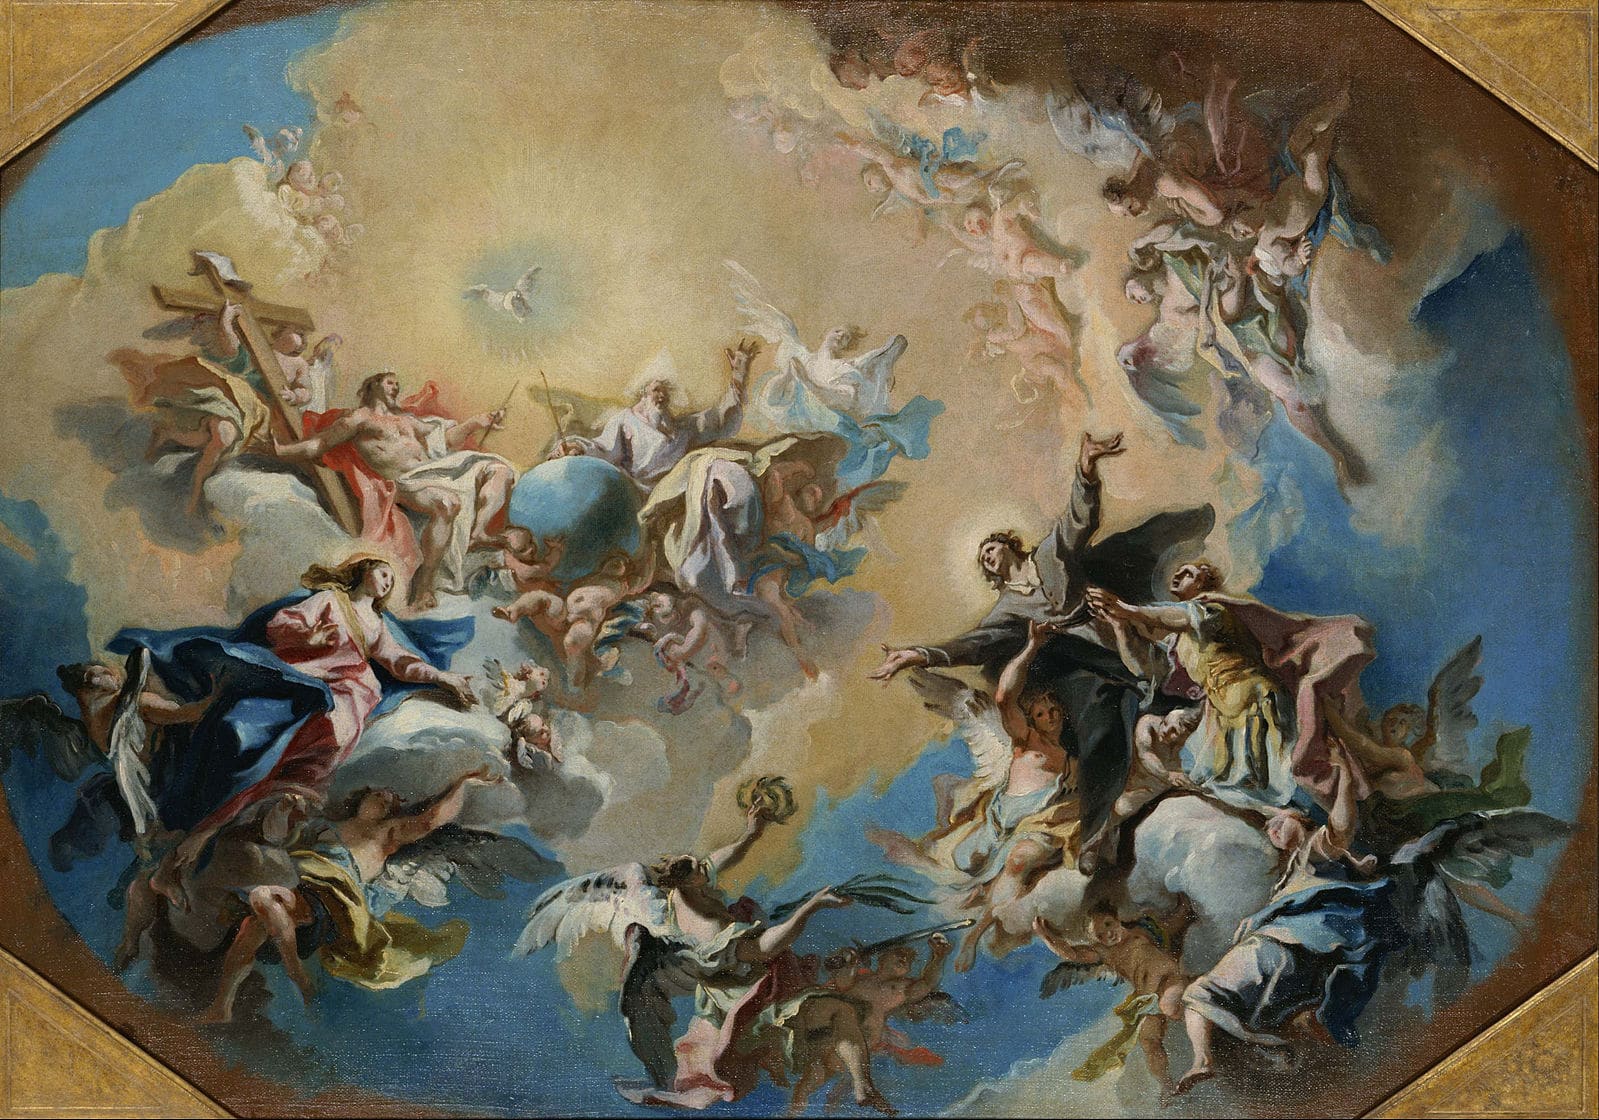 The Glorification of St. Felix and St. Adauctus - painting by Carlo Innocenzo Carlone of saints in Heaven